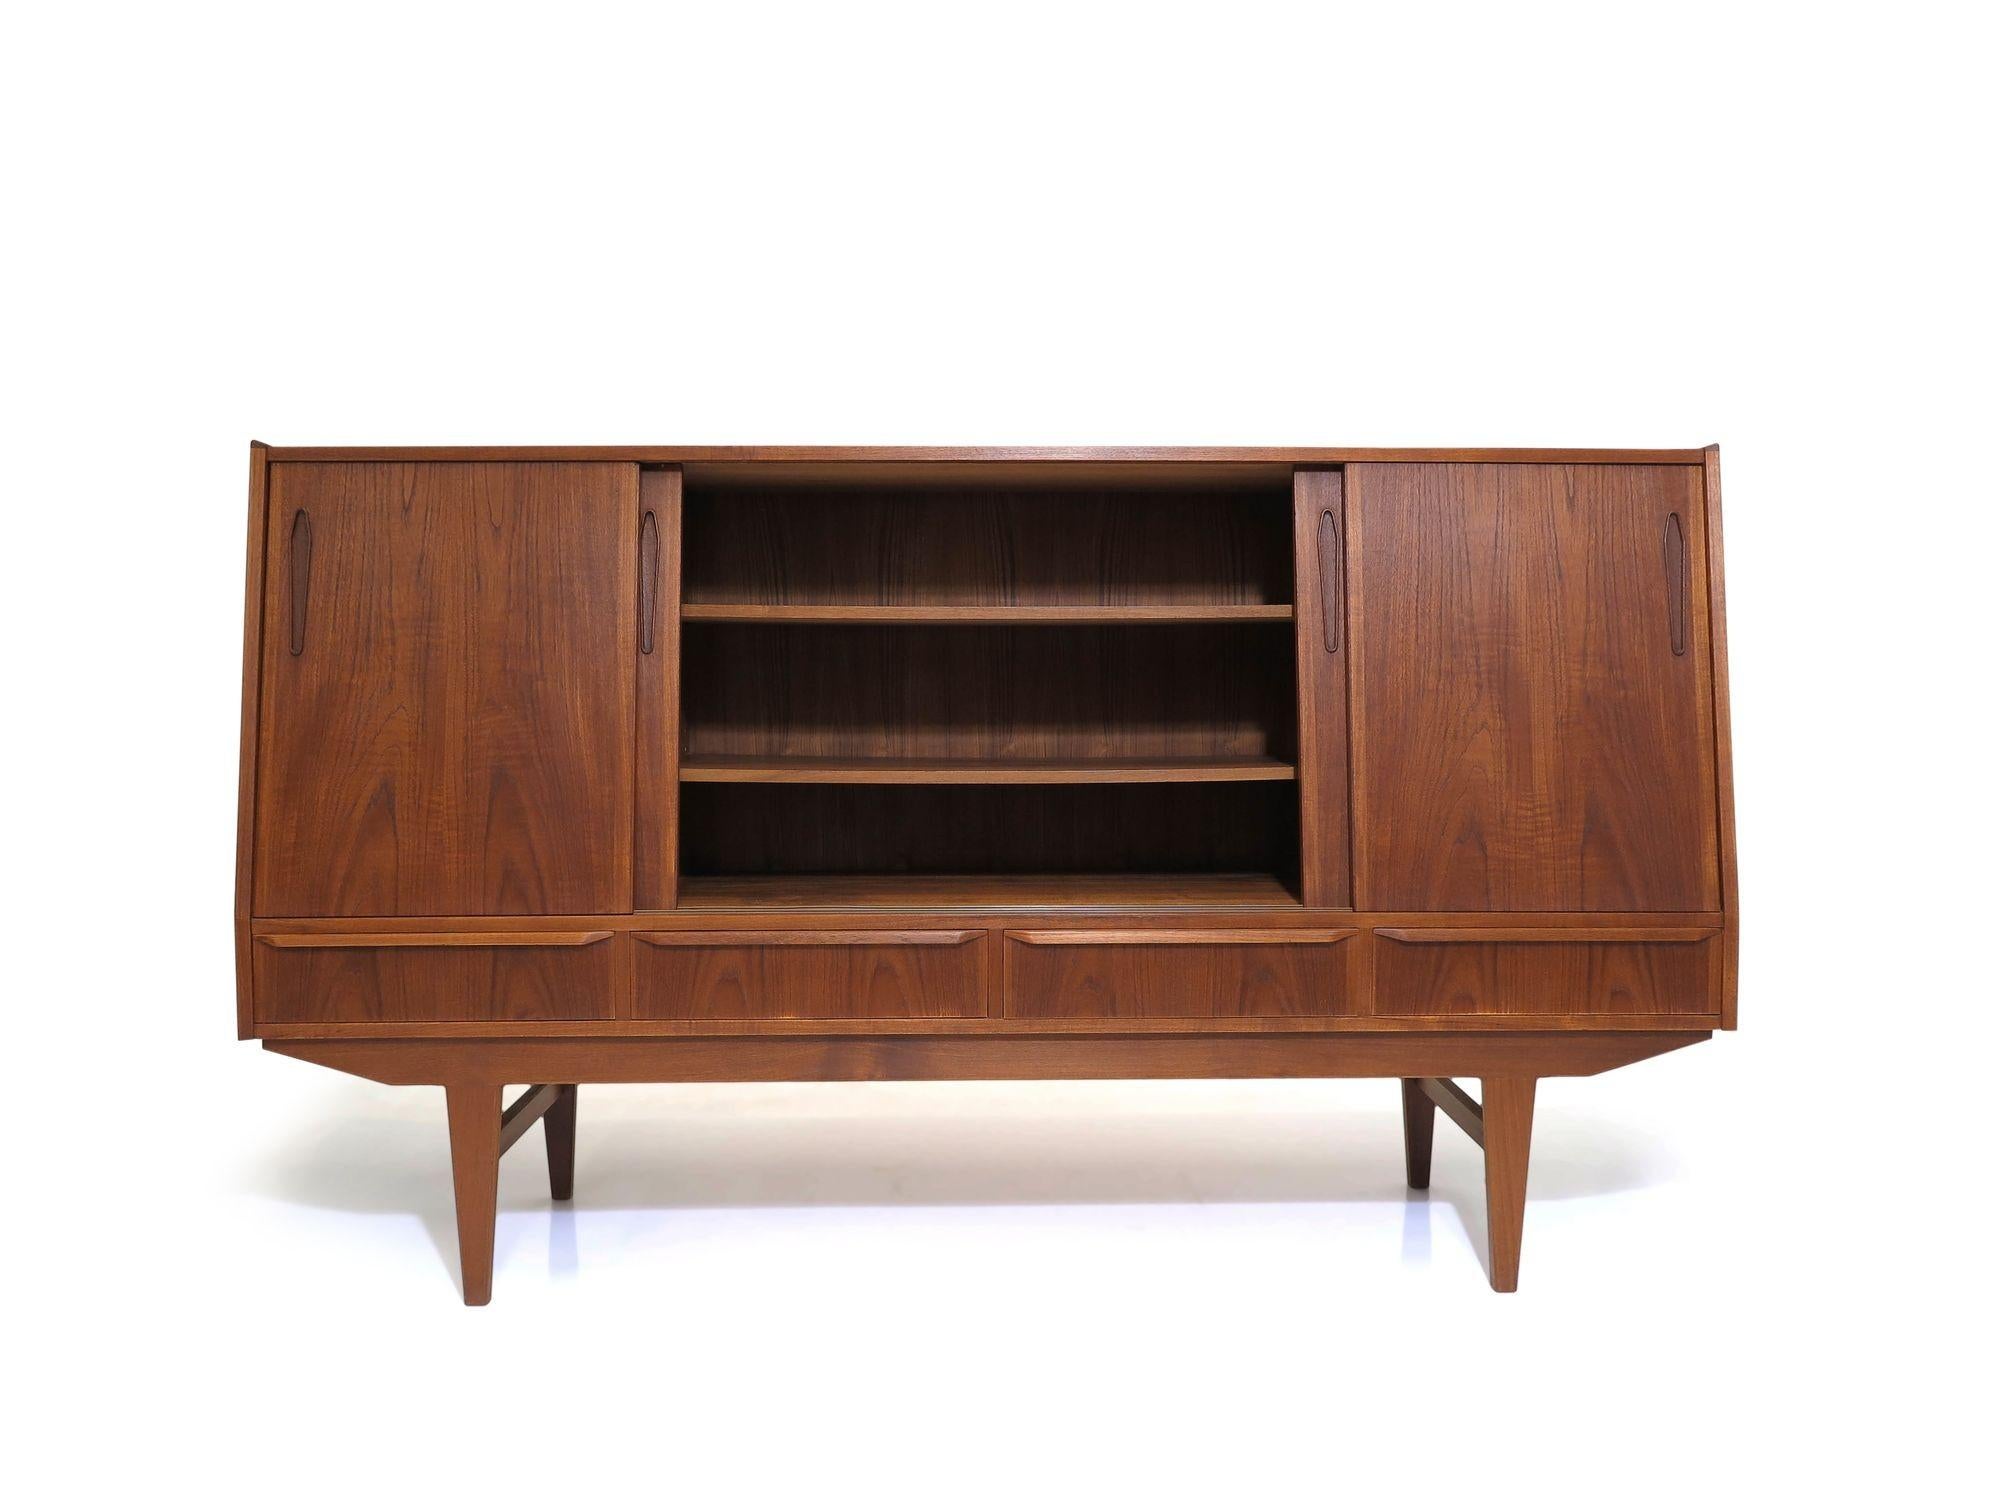 Scandinavian tall credenza with angled front crafted of old-growth teak with book-matched sliding doors revealing an interior with adjustable shelves and mirrored bar on left, above series of four drawers, raised on solid teak tapered